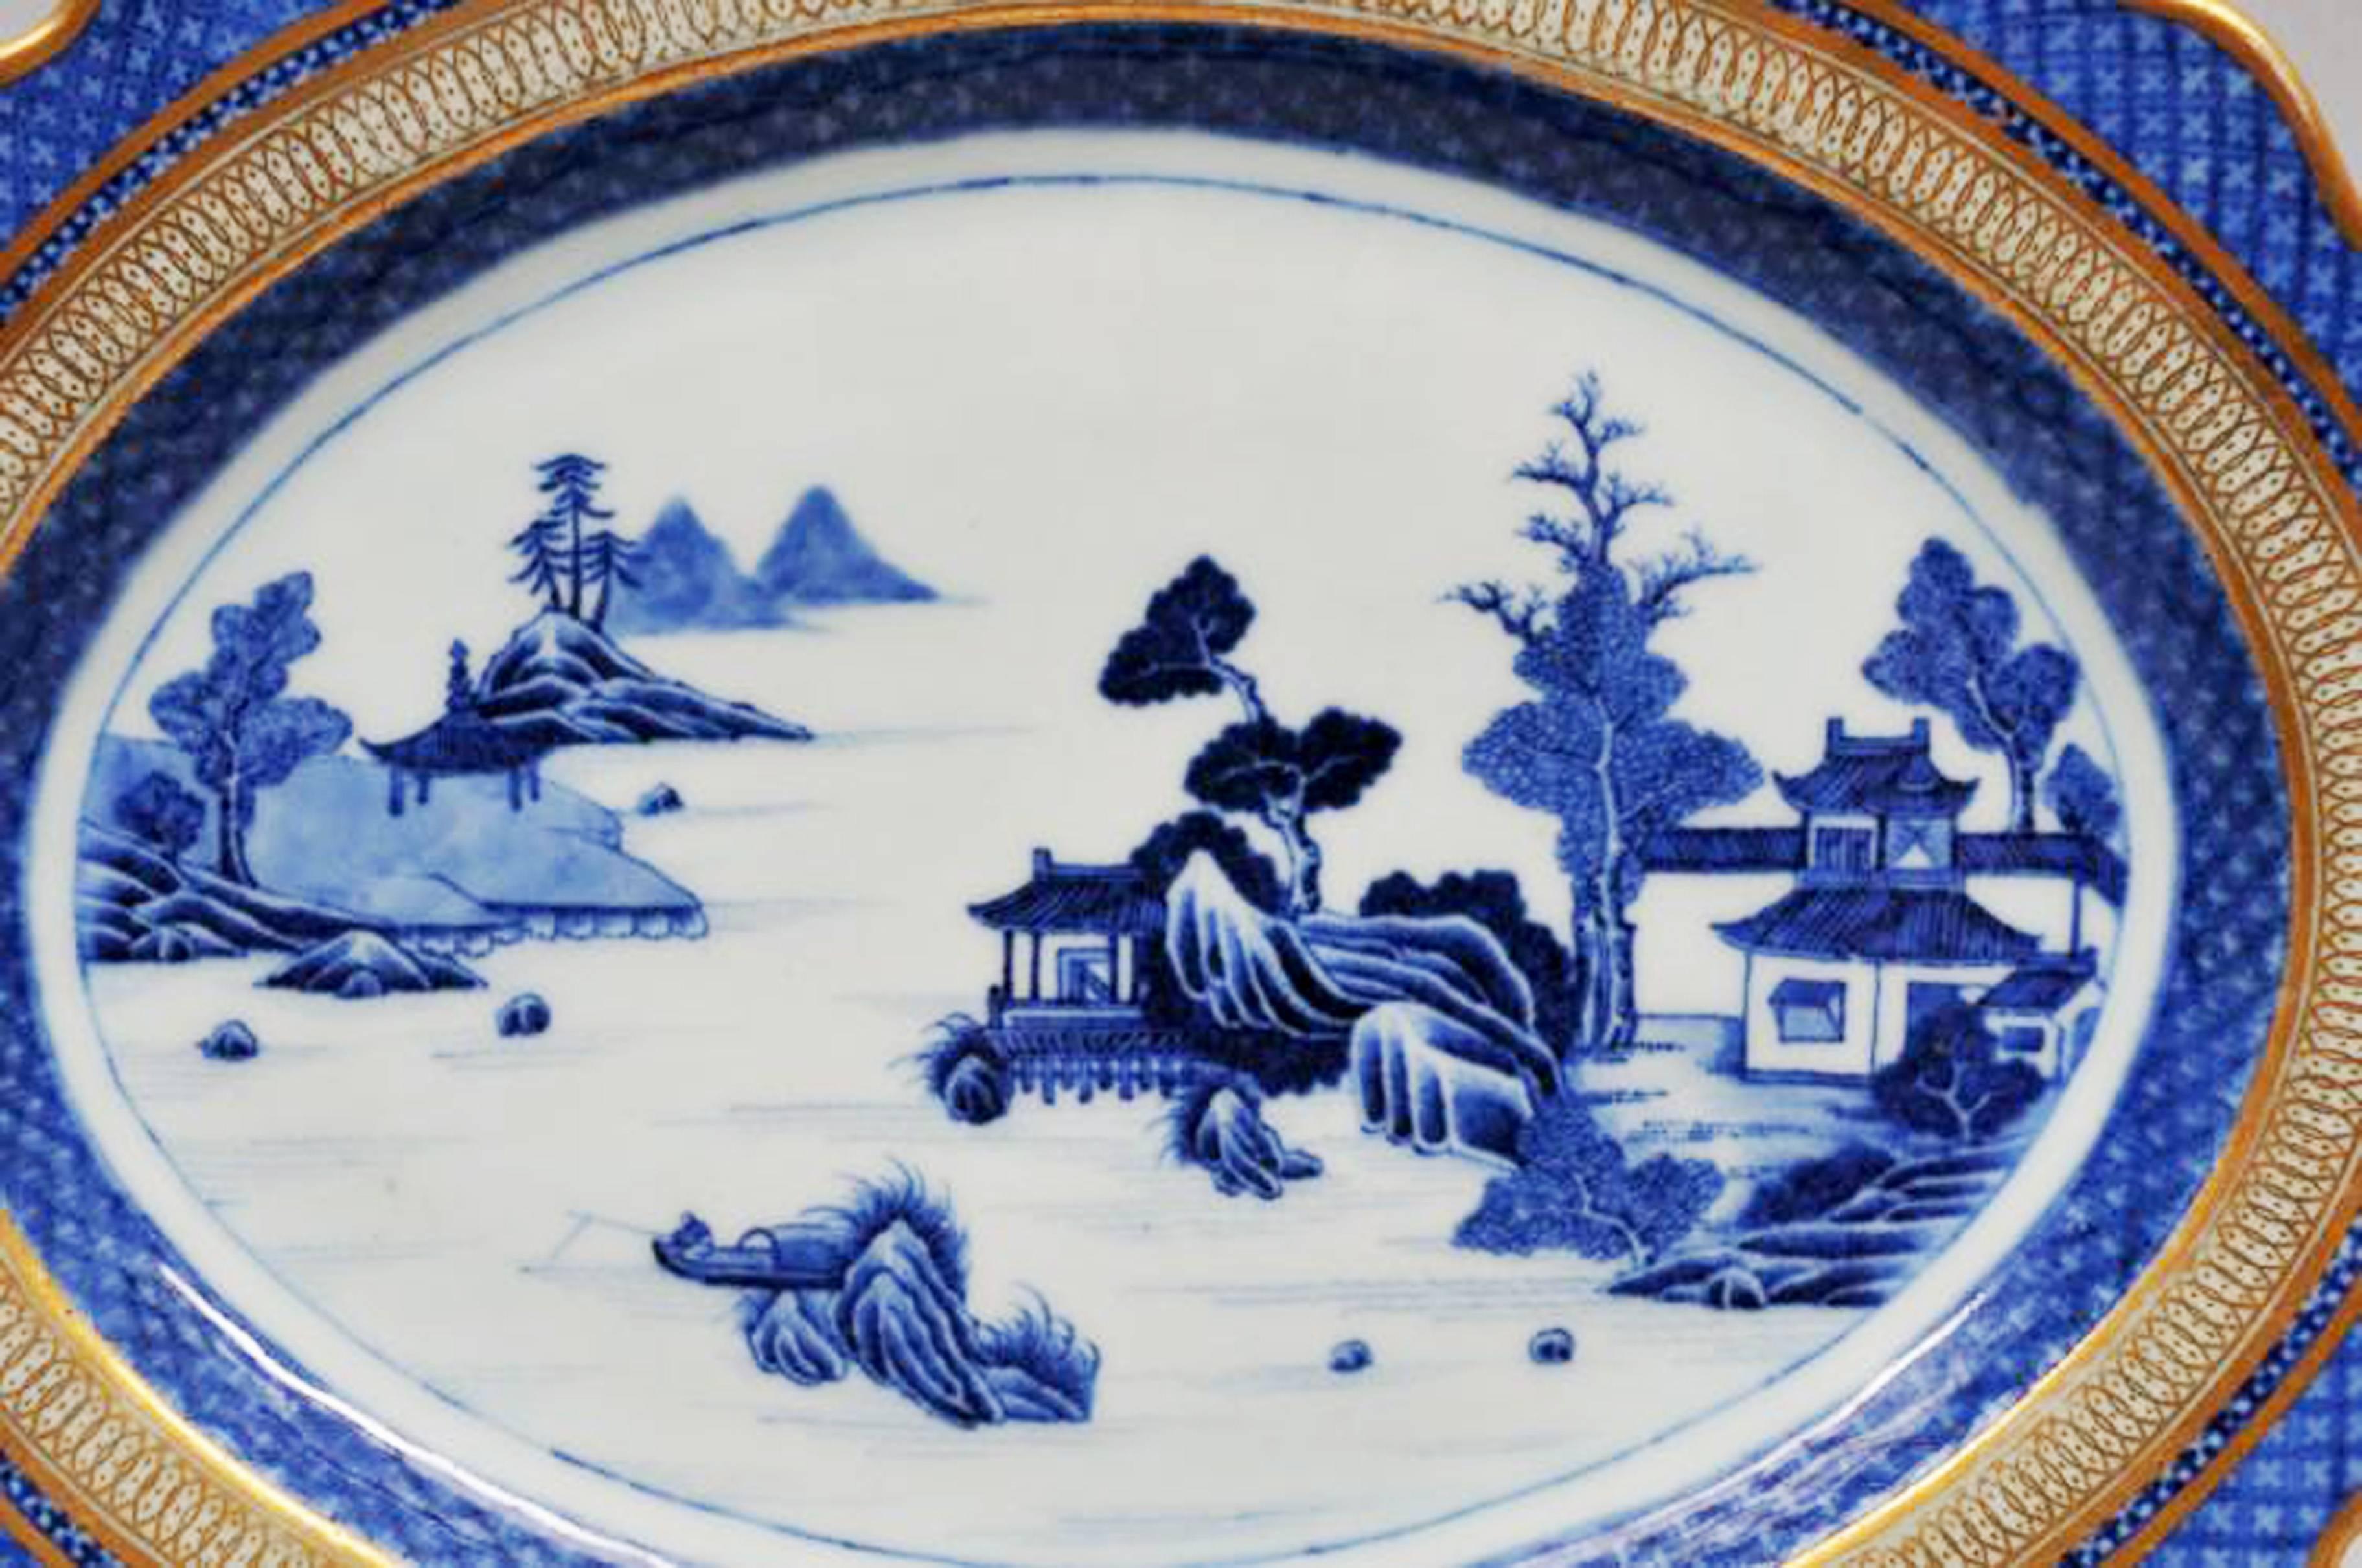 Chinese Export porcelain large underglaze blue and white dish with London-decorated gilt border, 
circa 1780

A large Chinese Export porcelain scalloped-edged dish with a Hills & Stream pattern with a diaper border and gilt decoration applied in